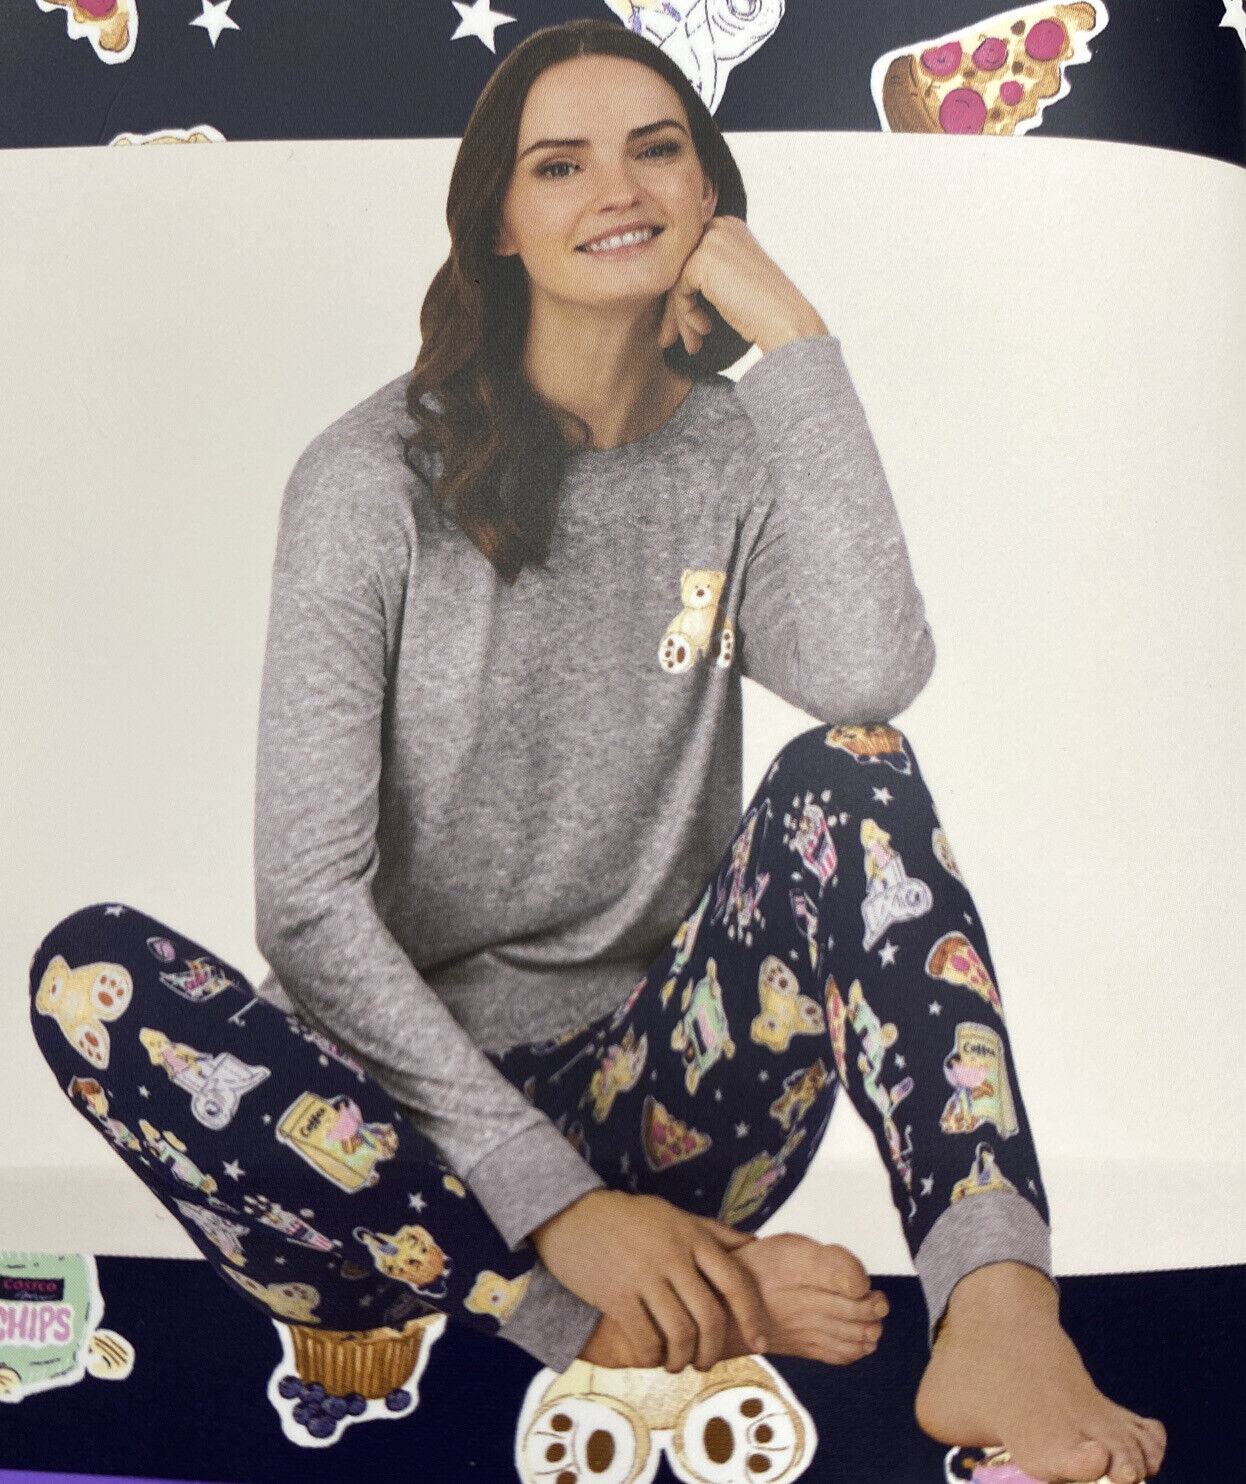 Jane and Bleecker Pajamas 3-Piece Set 1 Top and 2 Bottoms Womens Size -  beyond exchange